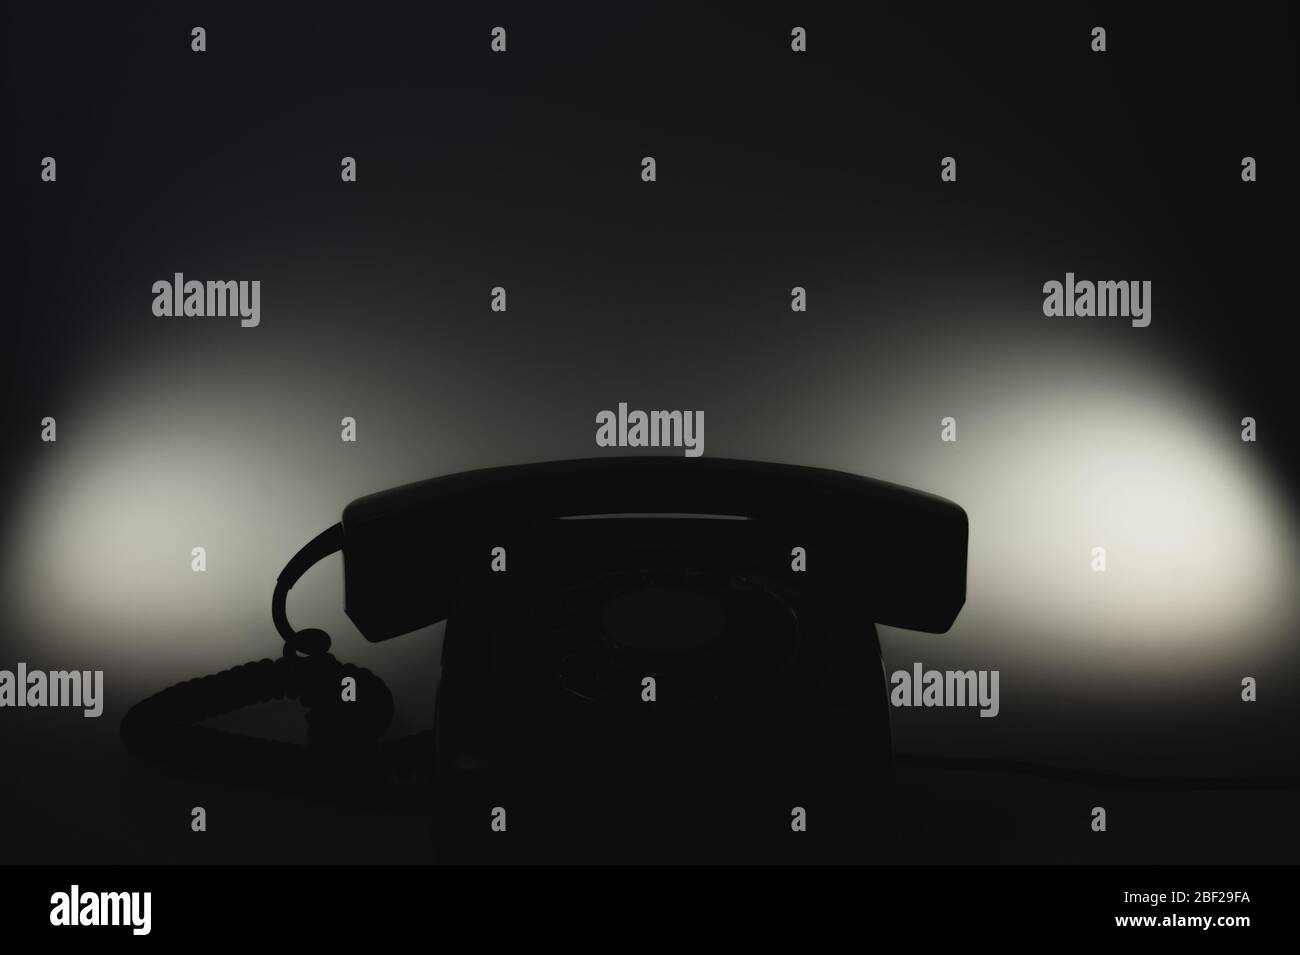 Classic phone silhouette in the dark. telephone with phone receiver. office background. old communication technology Stock Photo